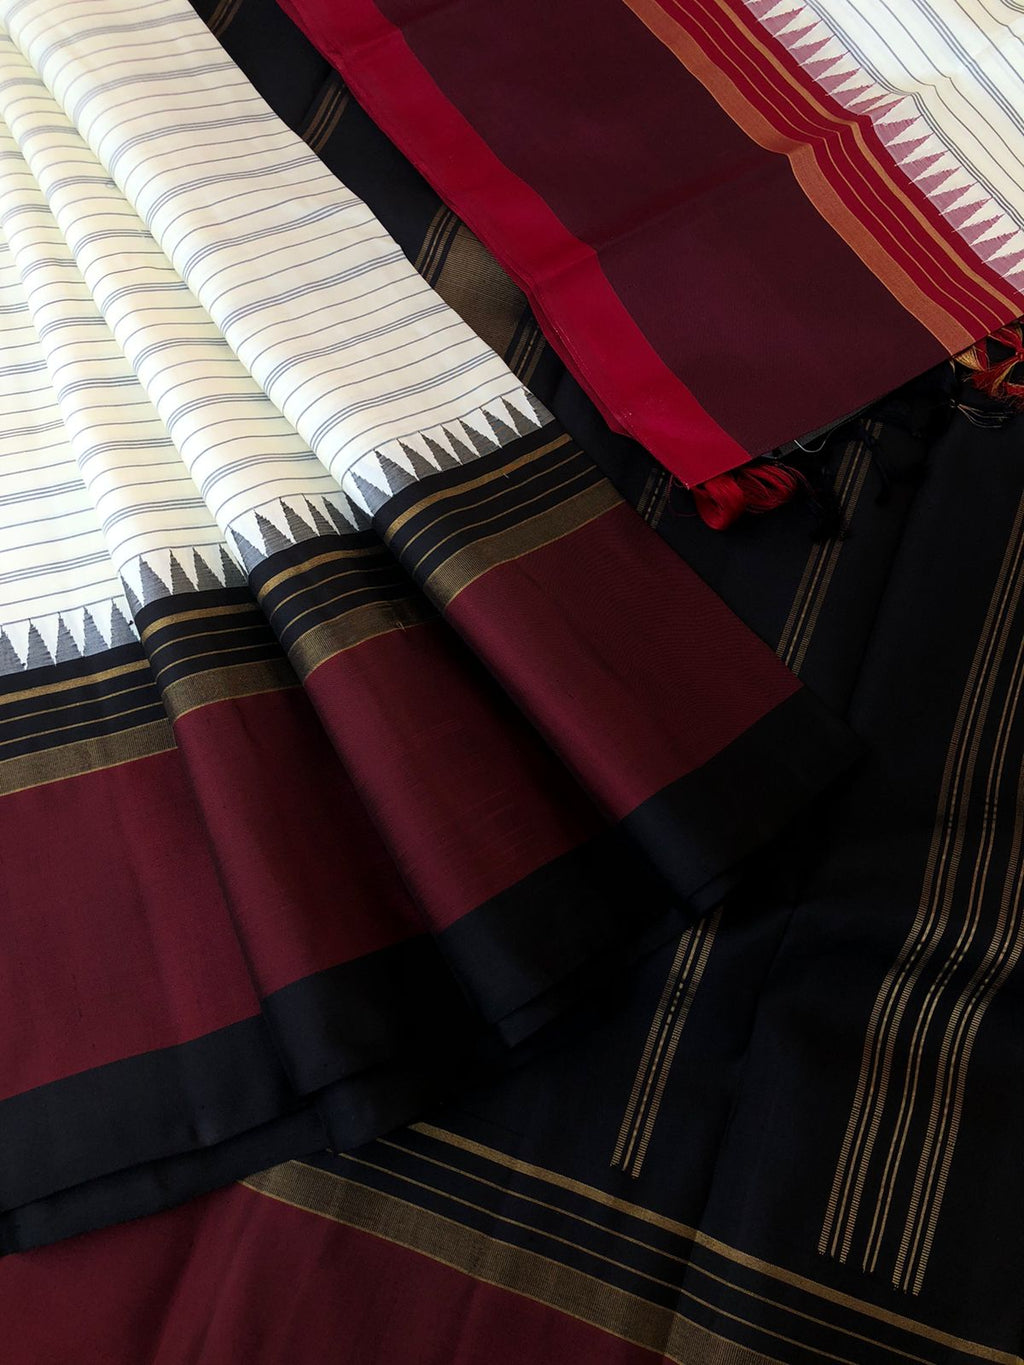 Connected by Korvai on Kanchivaram -classy smart off-white with black and wine ganga jammuna korvai woven boarders